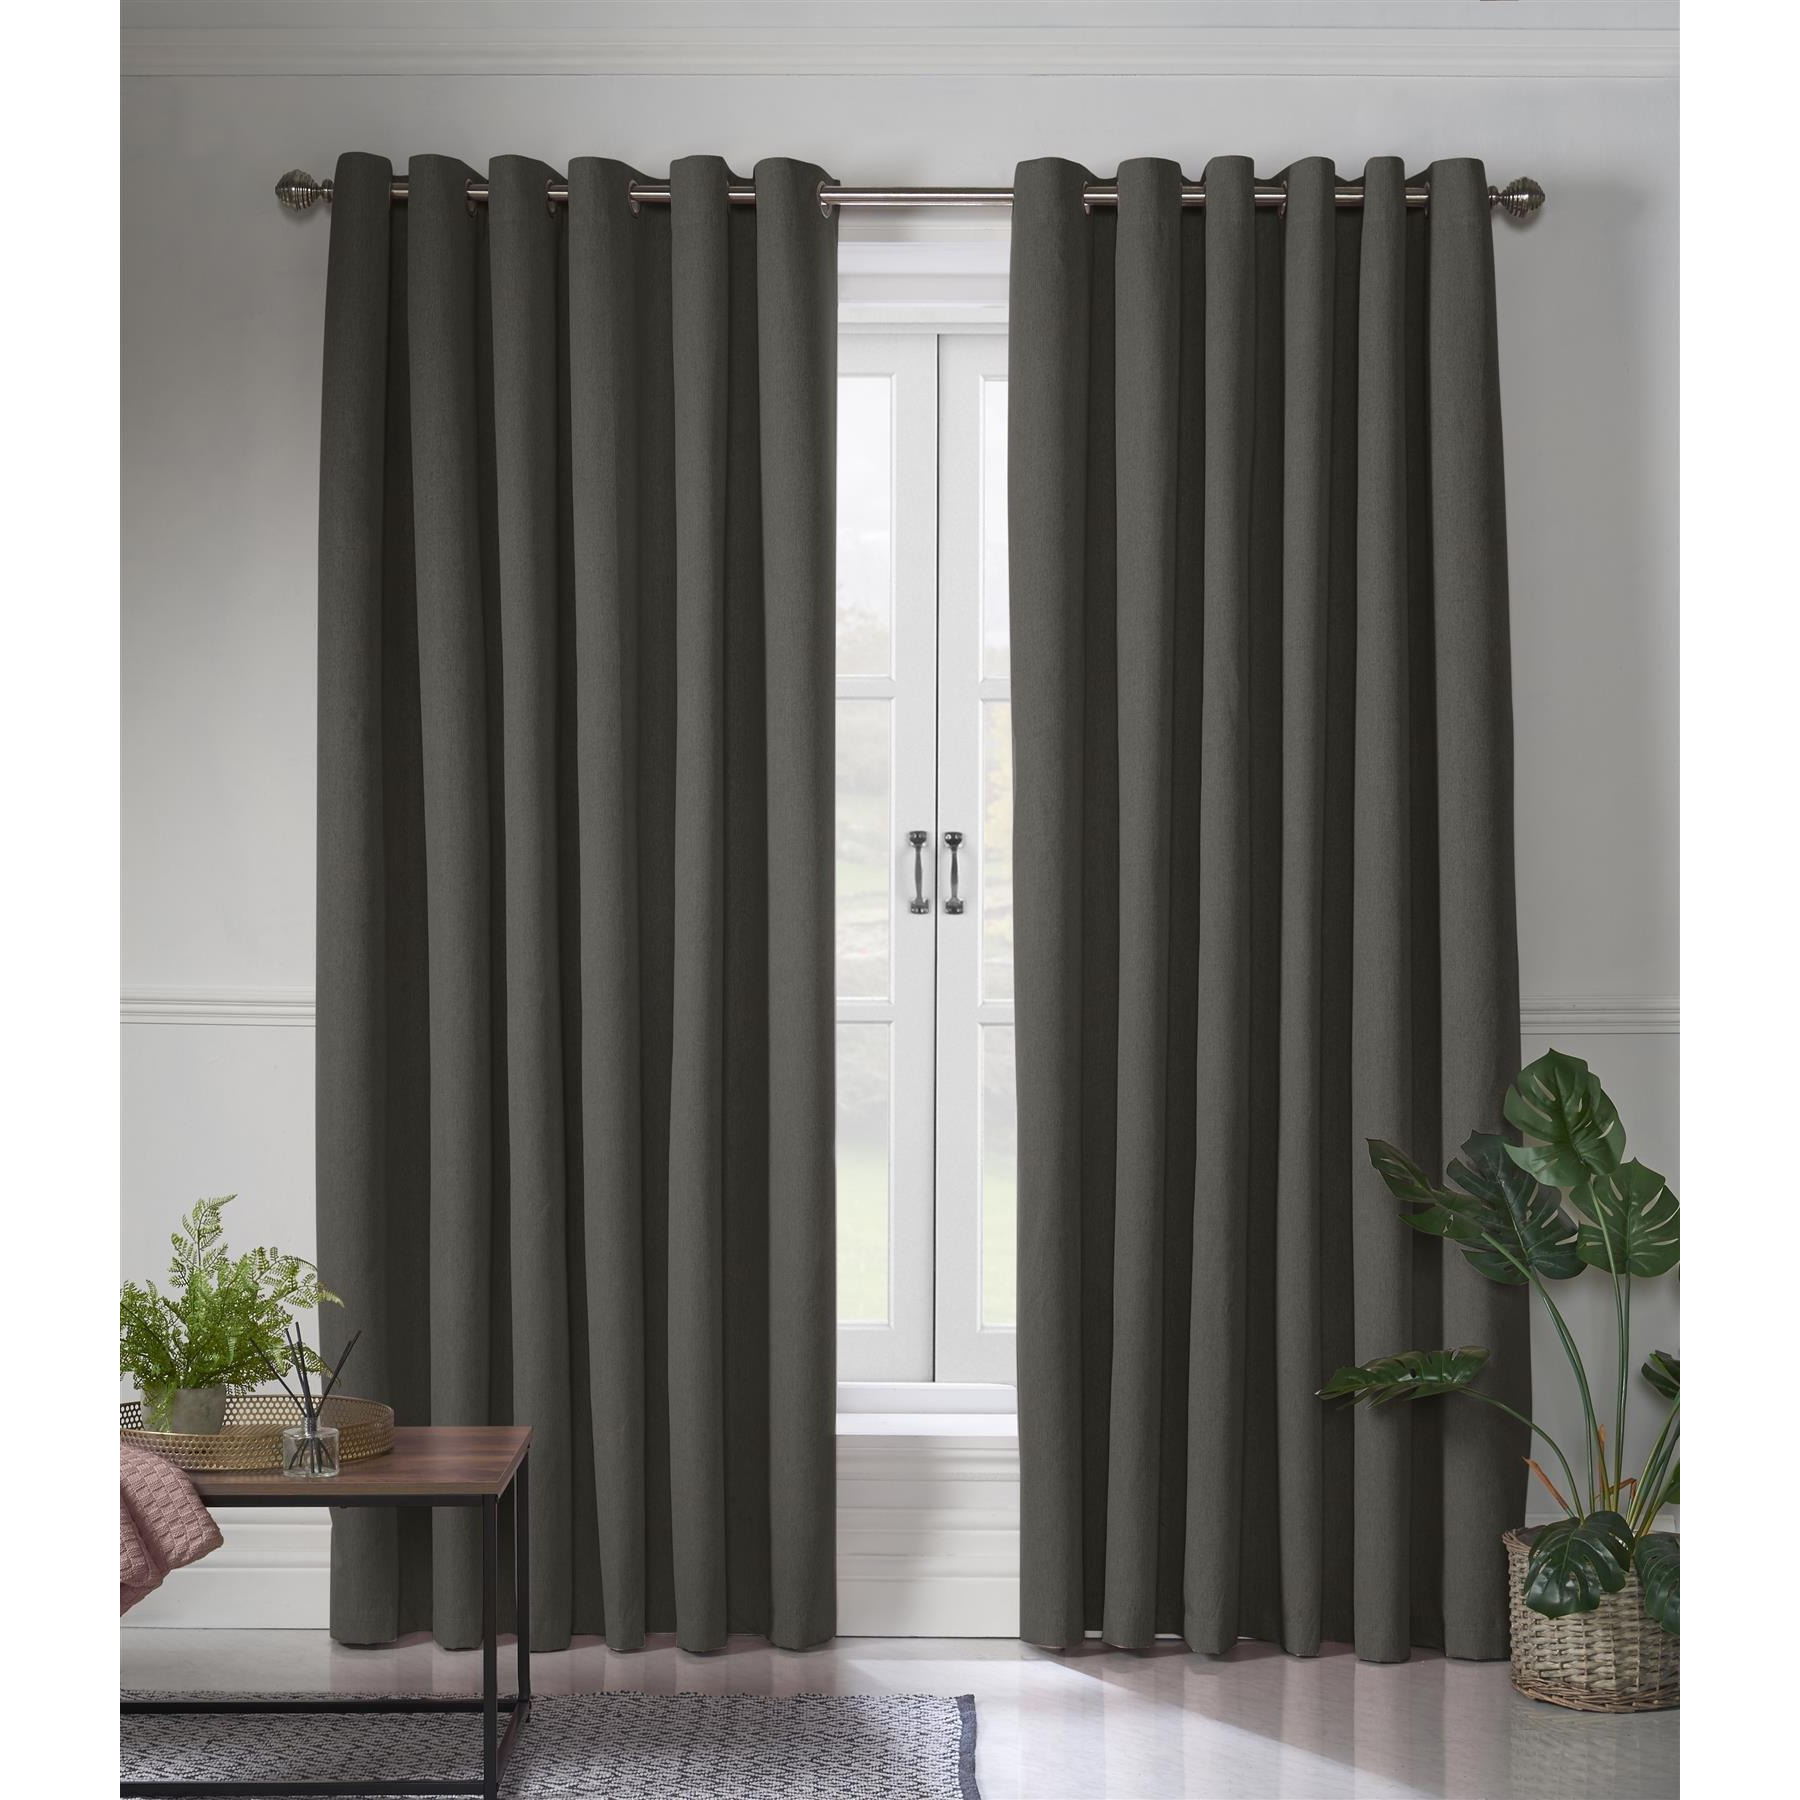 Linen Look Ring Top Blackout Curtains - image 1